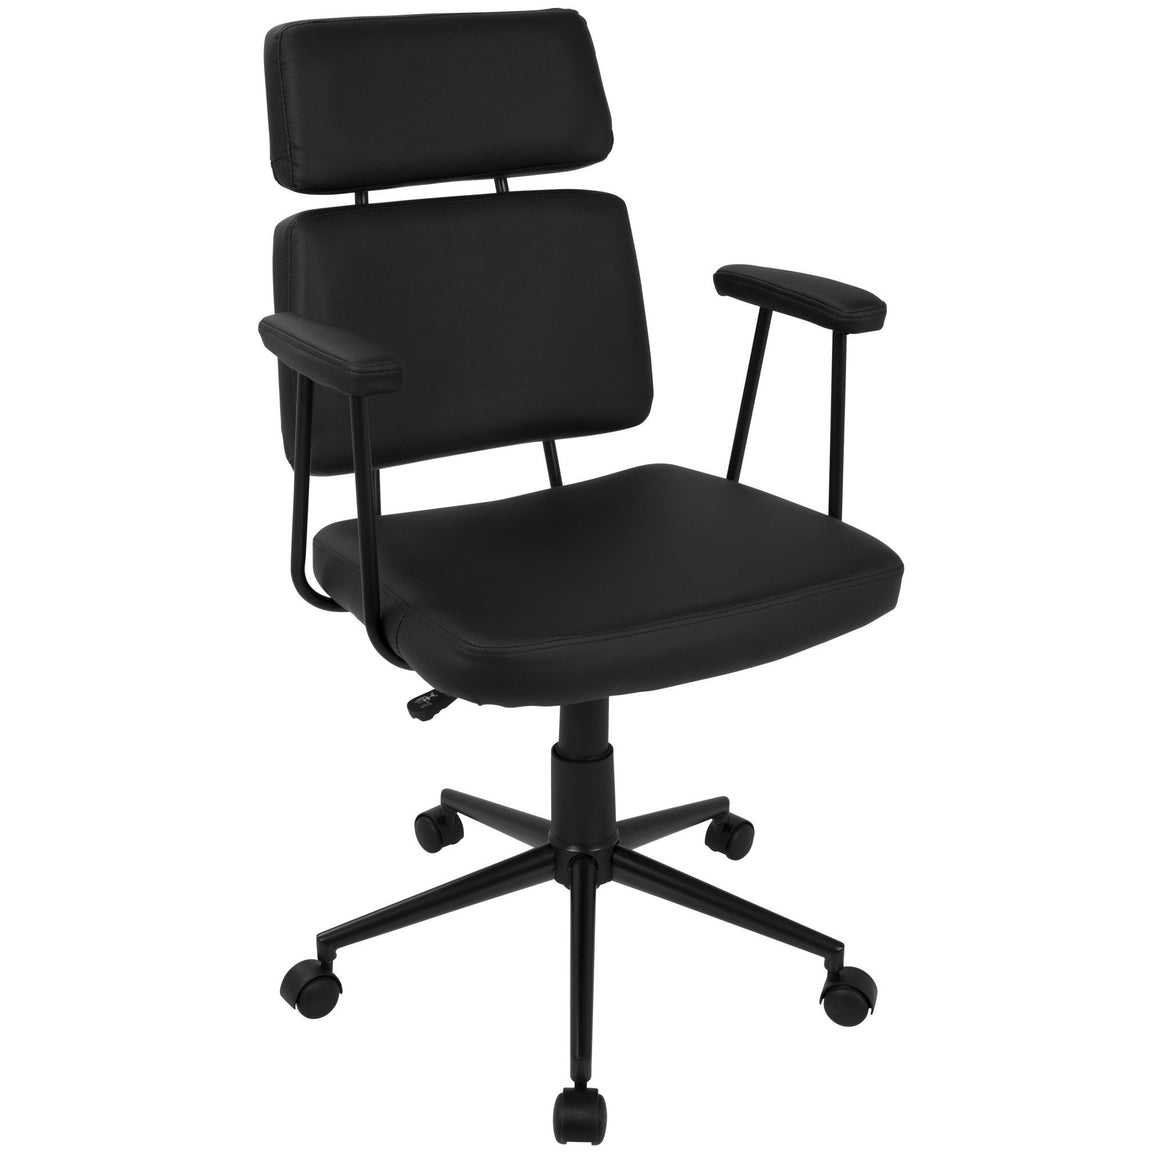 Sigmund Contemporary Adjustable Office Chair in Black Faux Leather by LumiSource